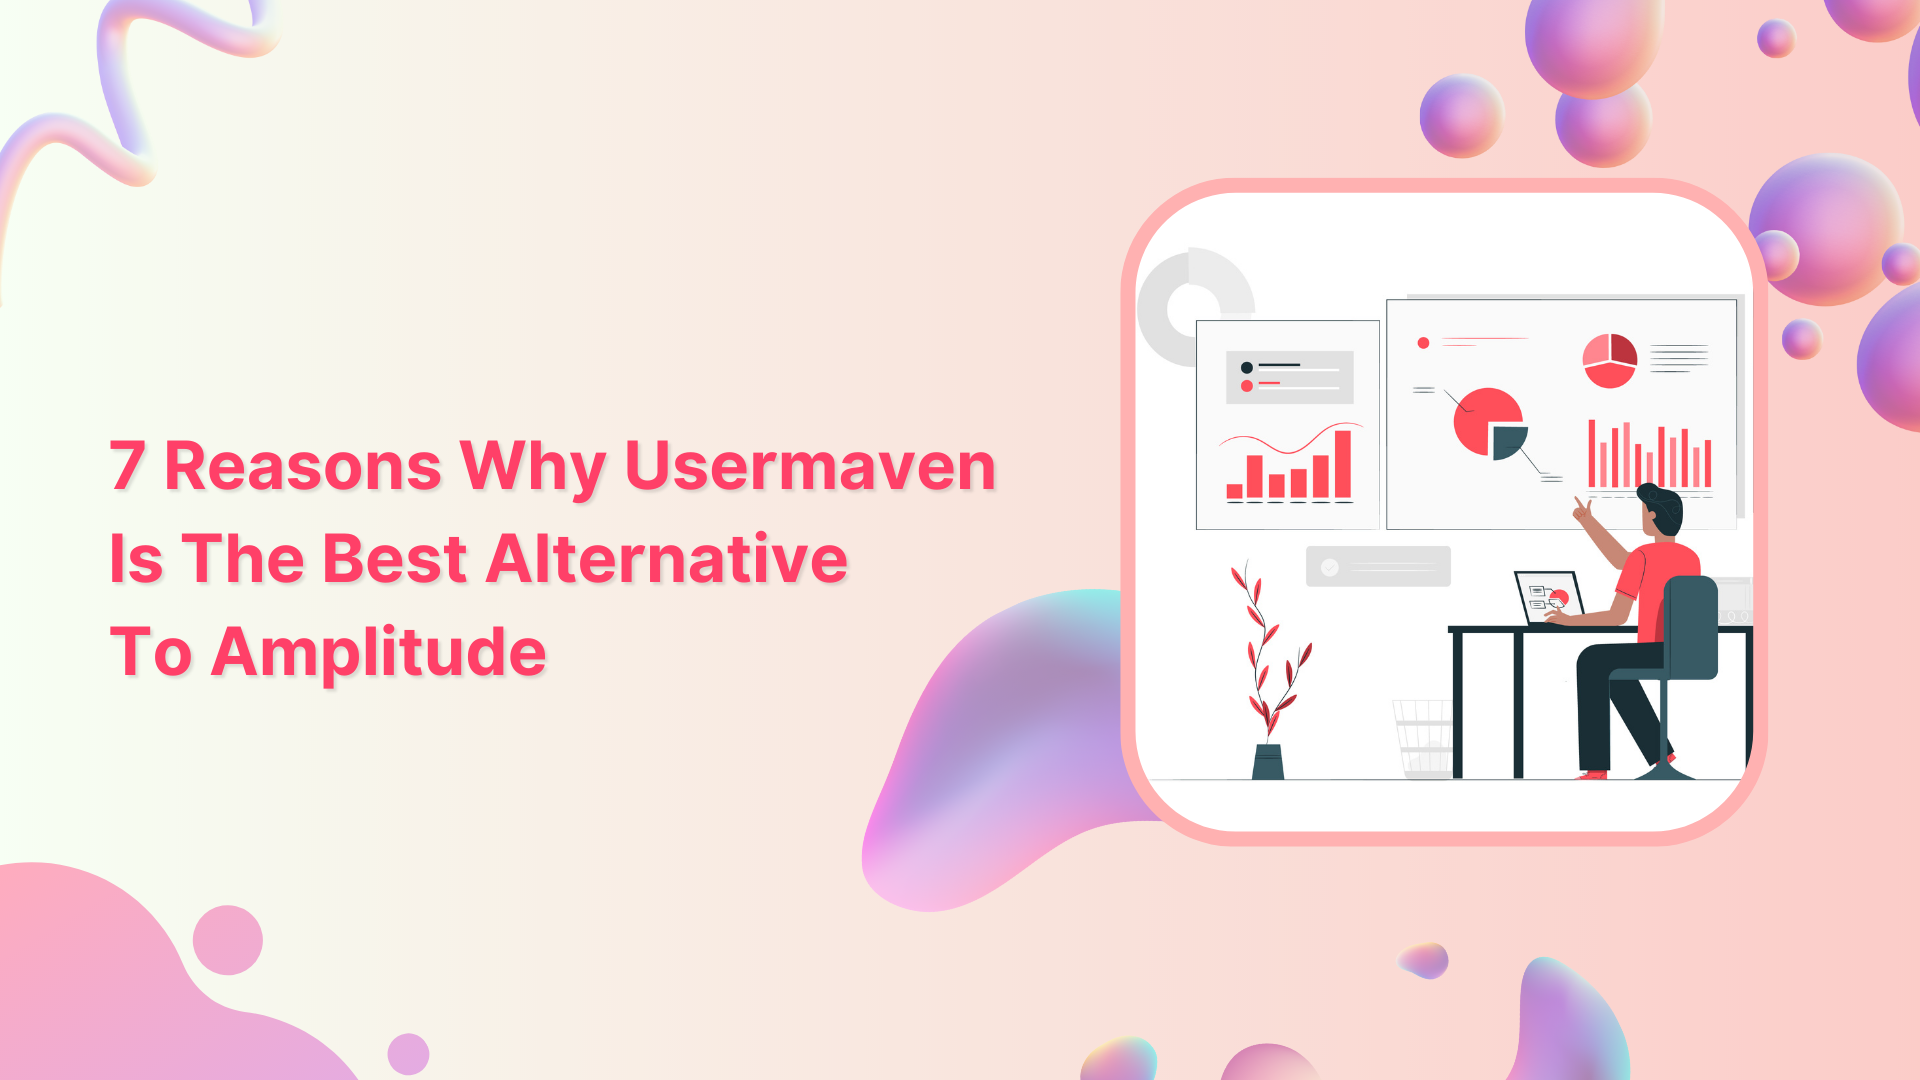 7 Reasons Why Usermaven Is The Best Alternative To Amplitude